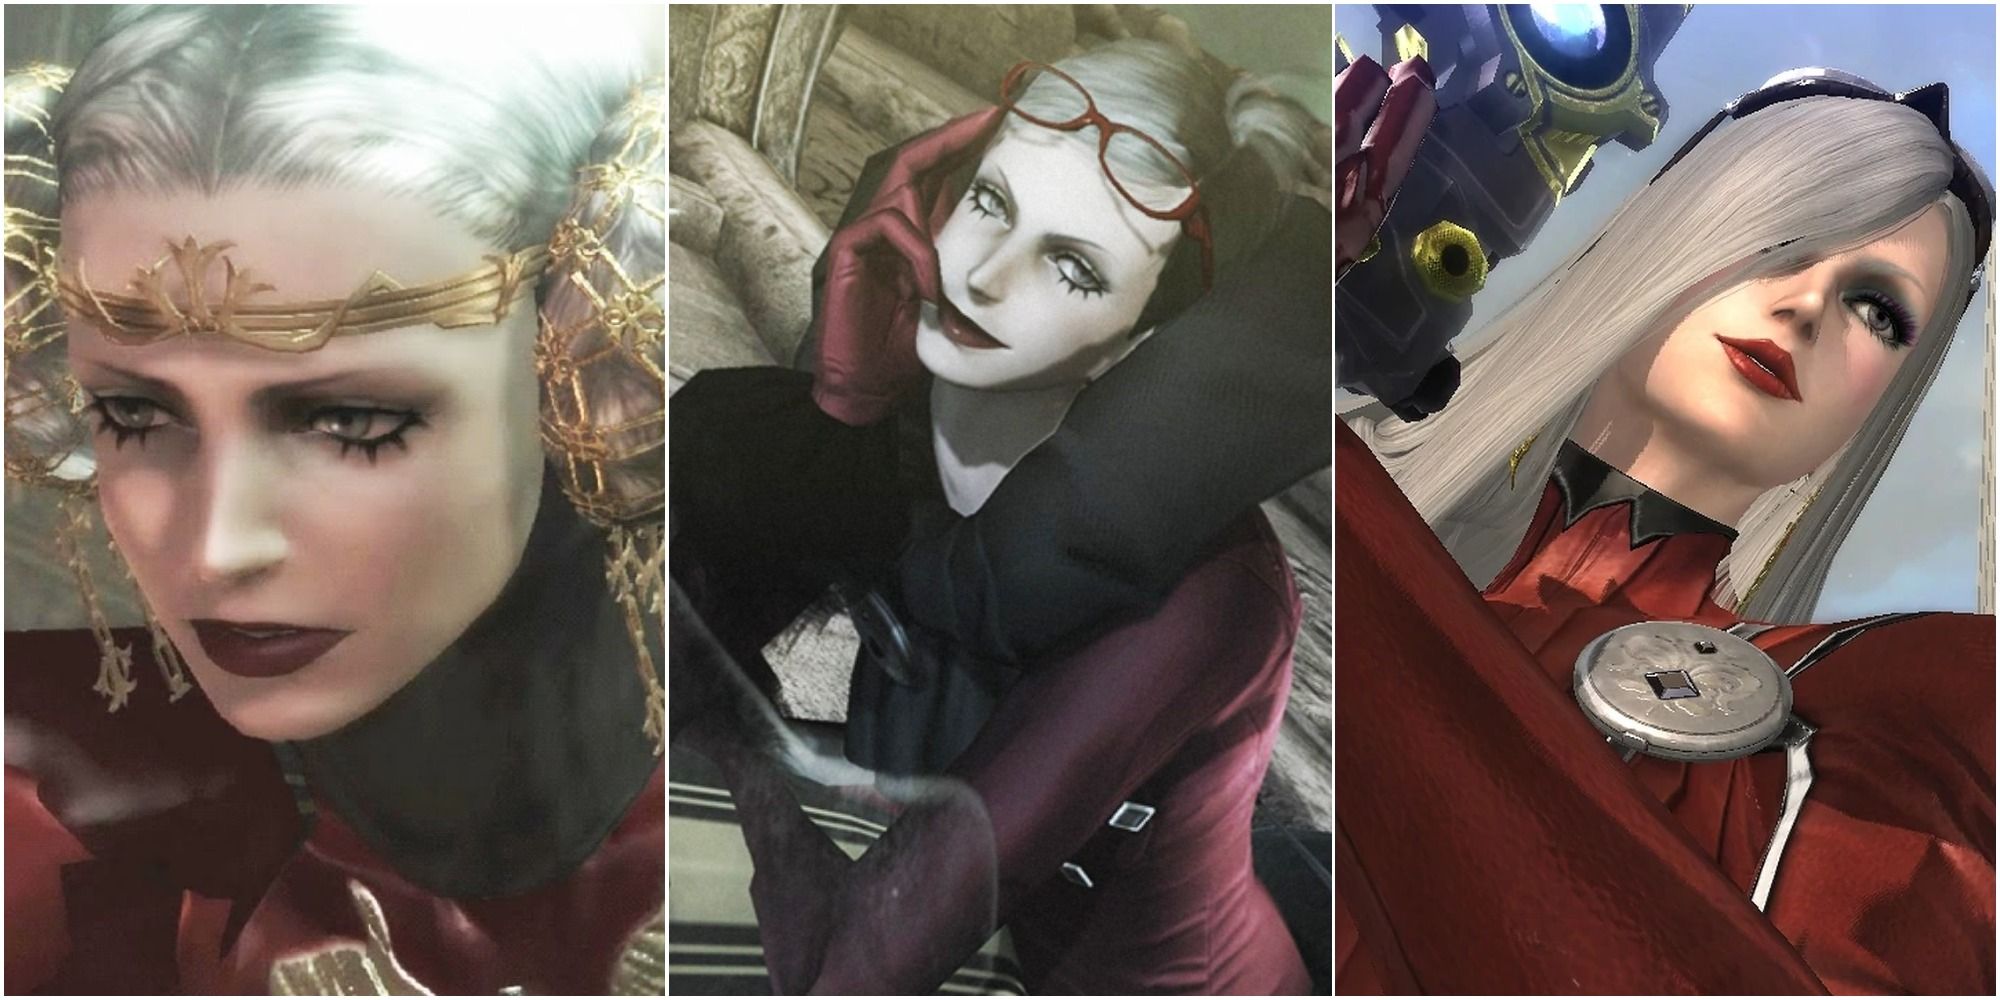 Jeanne in Bayonetta 1 (left & middle) and in Bayonetta 2 (right)